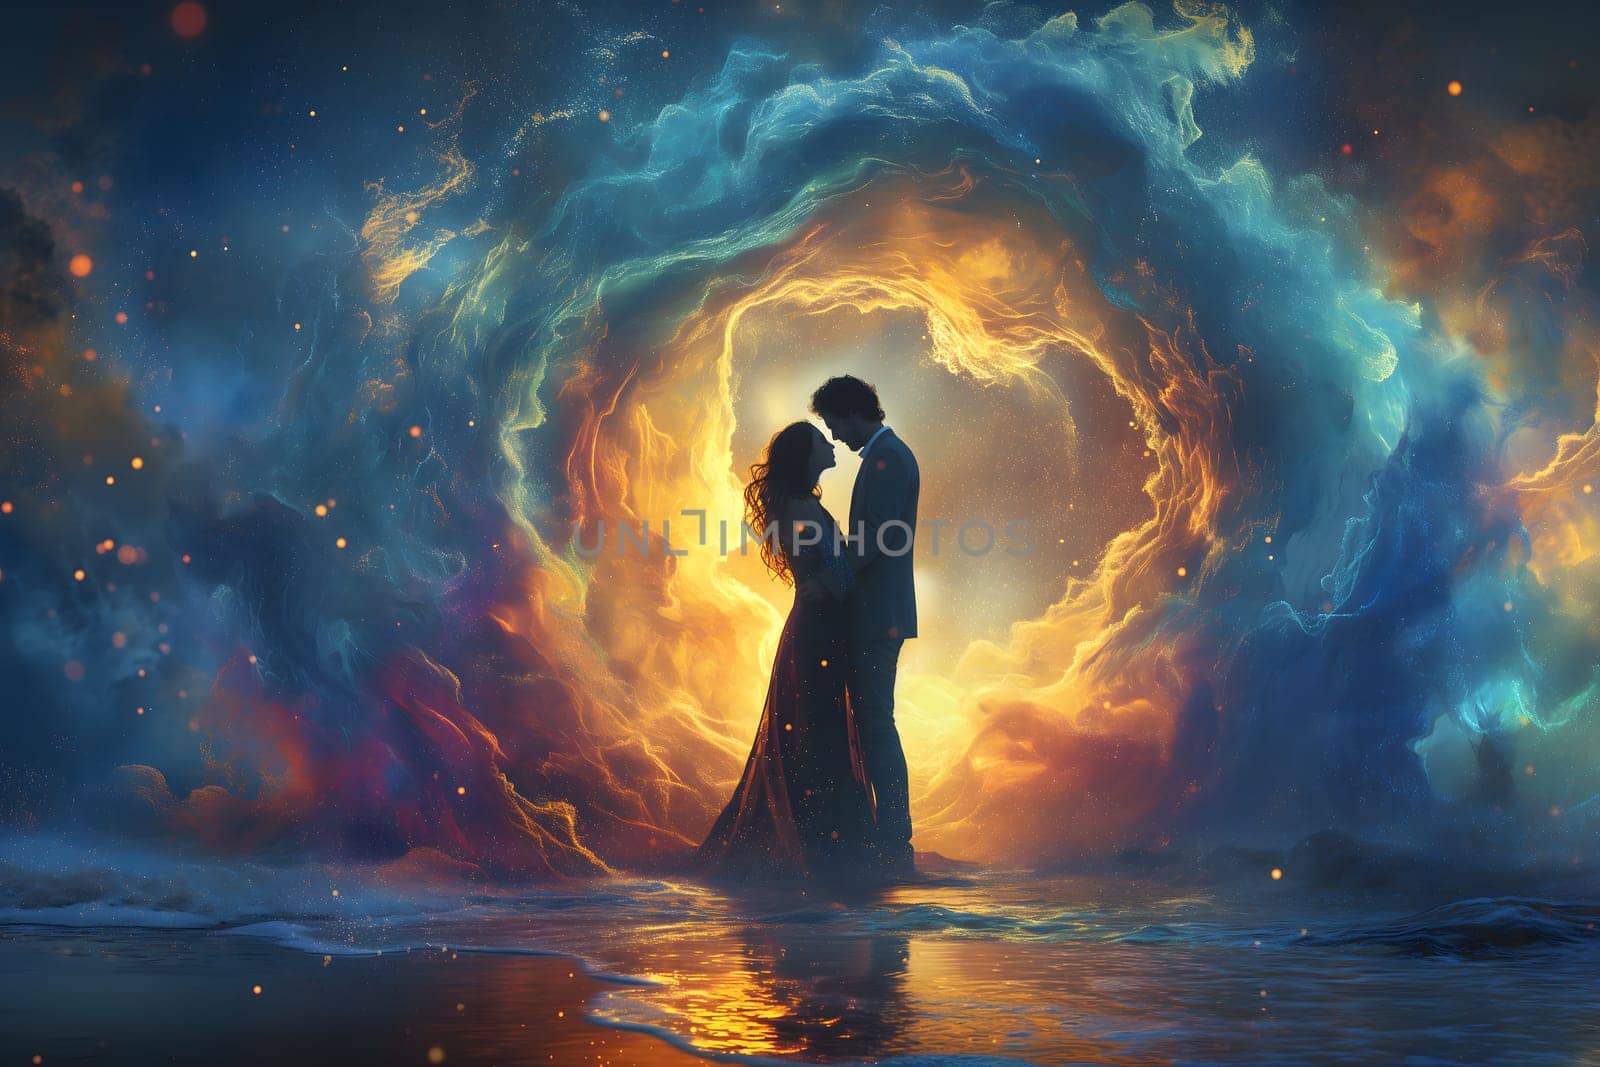 Man and woman embracing in surreal, colorful liquid fantasy dreamscape by z1b